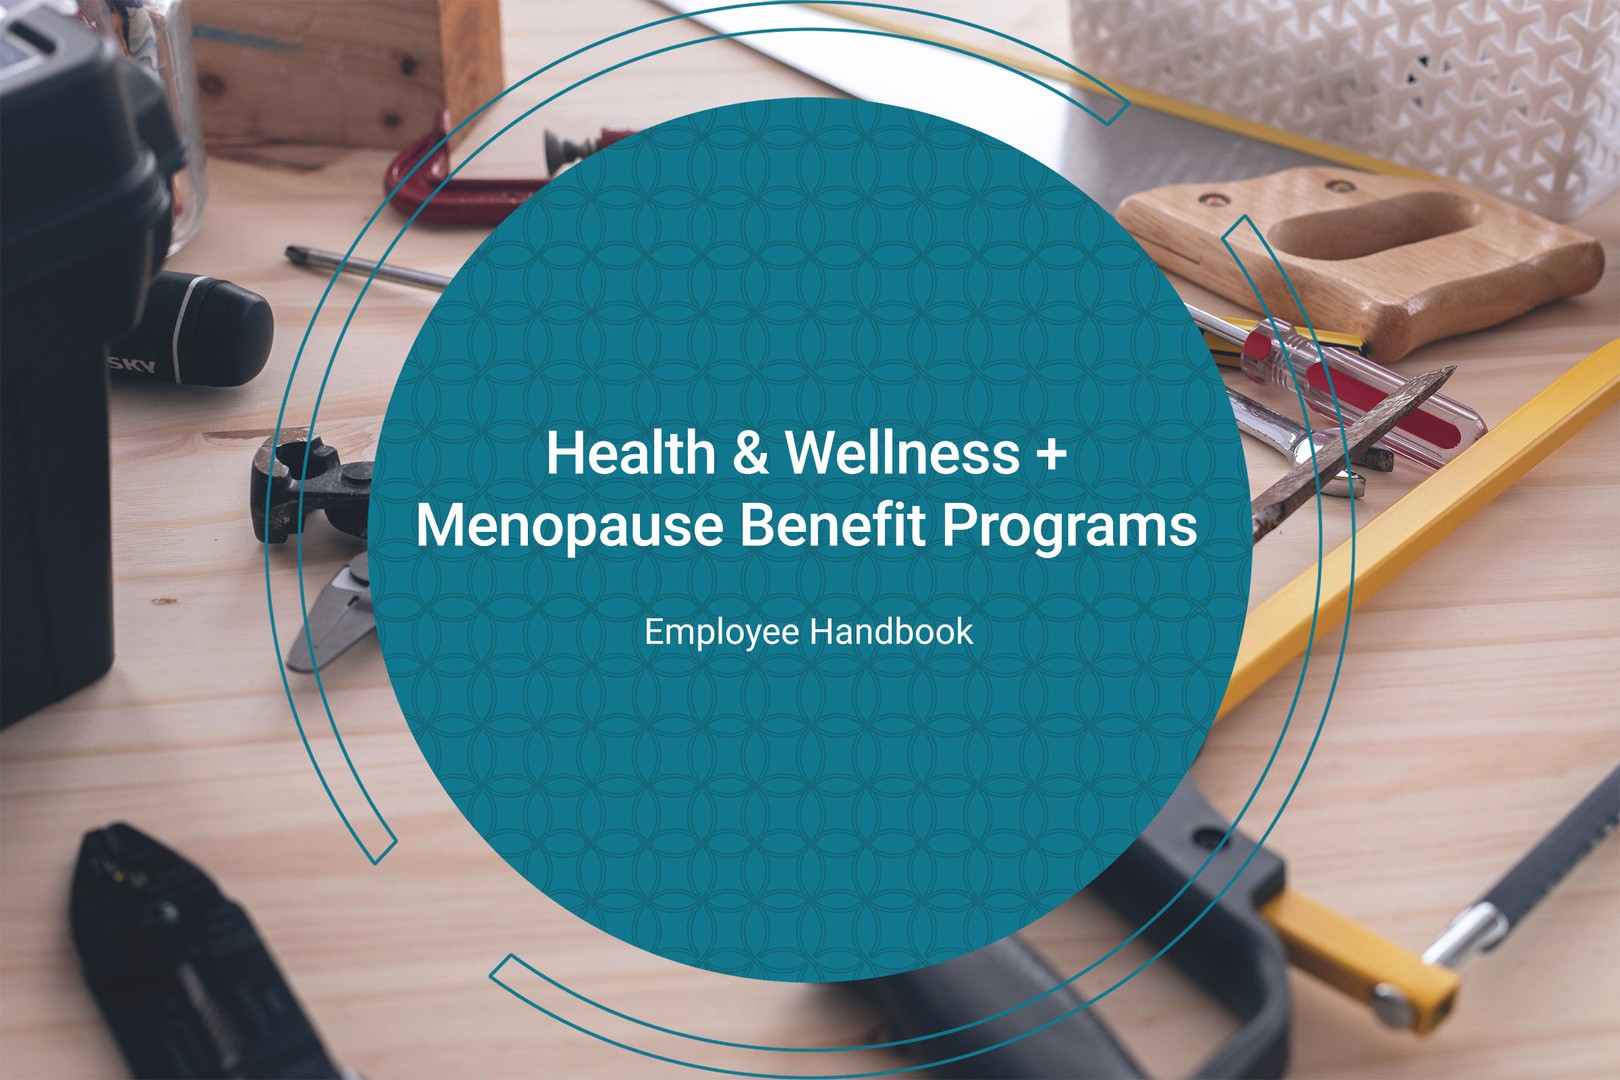 a teal circle containing the text 'health & wellness + menopause benefit programs' overlays a photo of a wooden workbench covered in tools